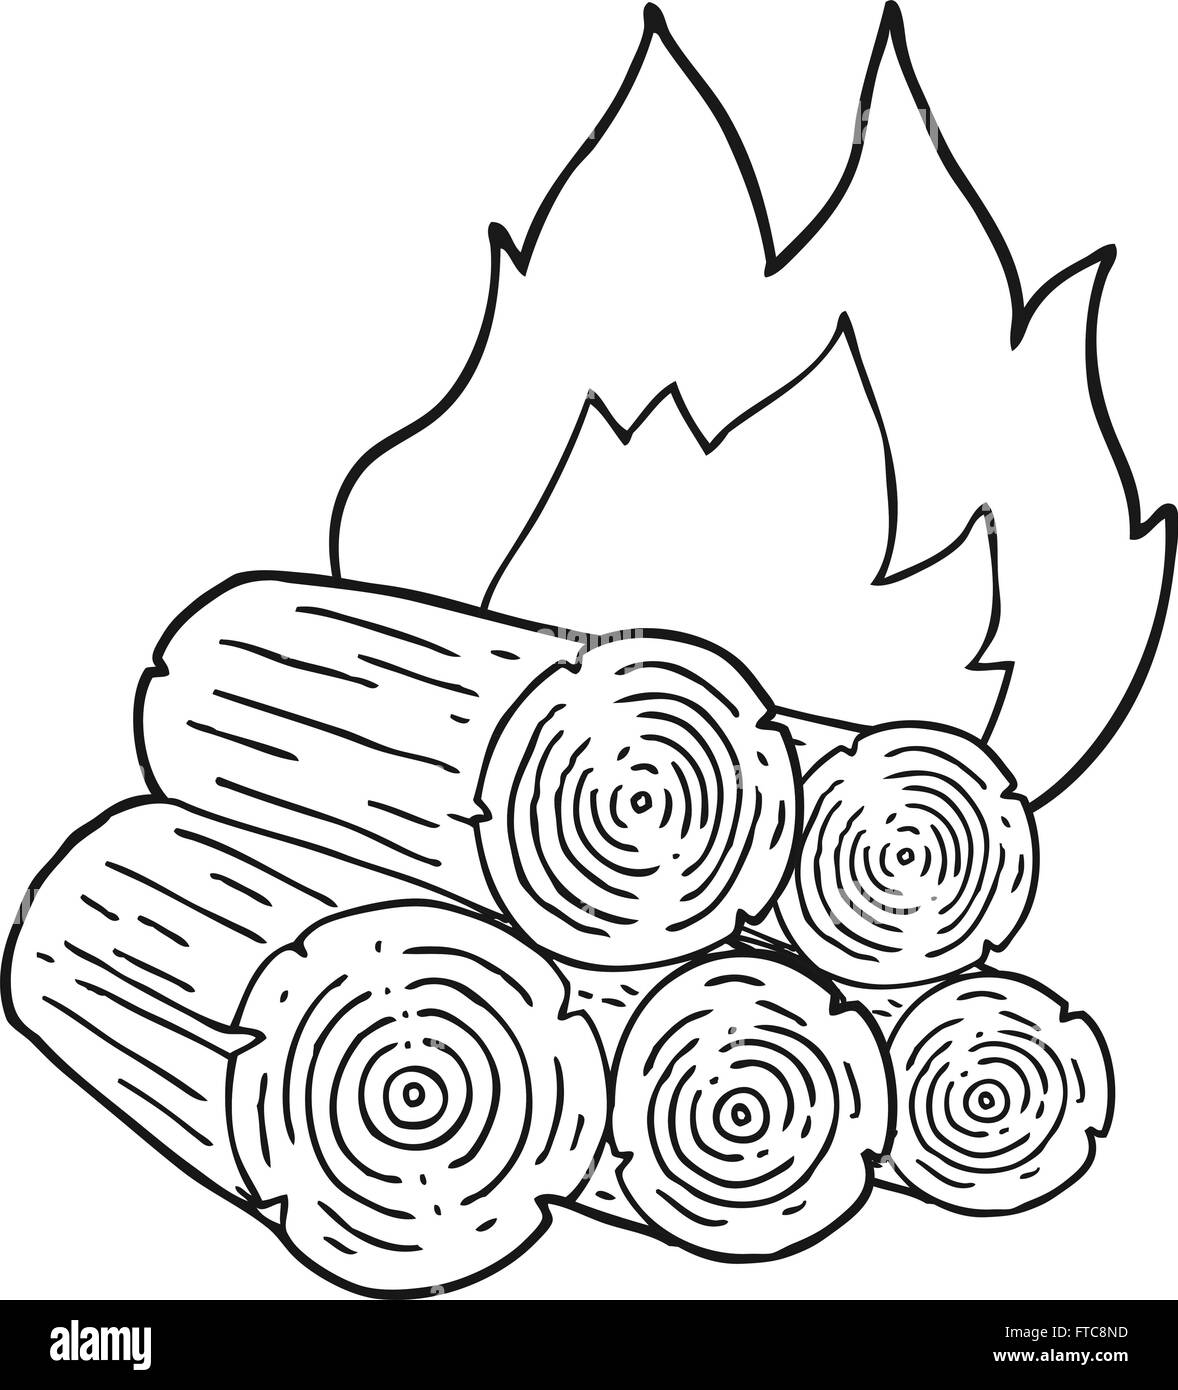 freehand drawn black and white cartoon burning logs Stock Vector